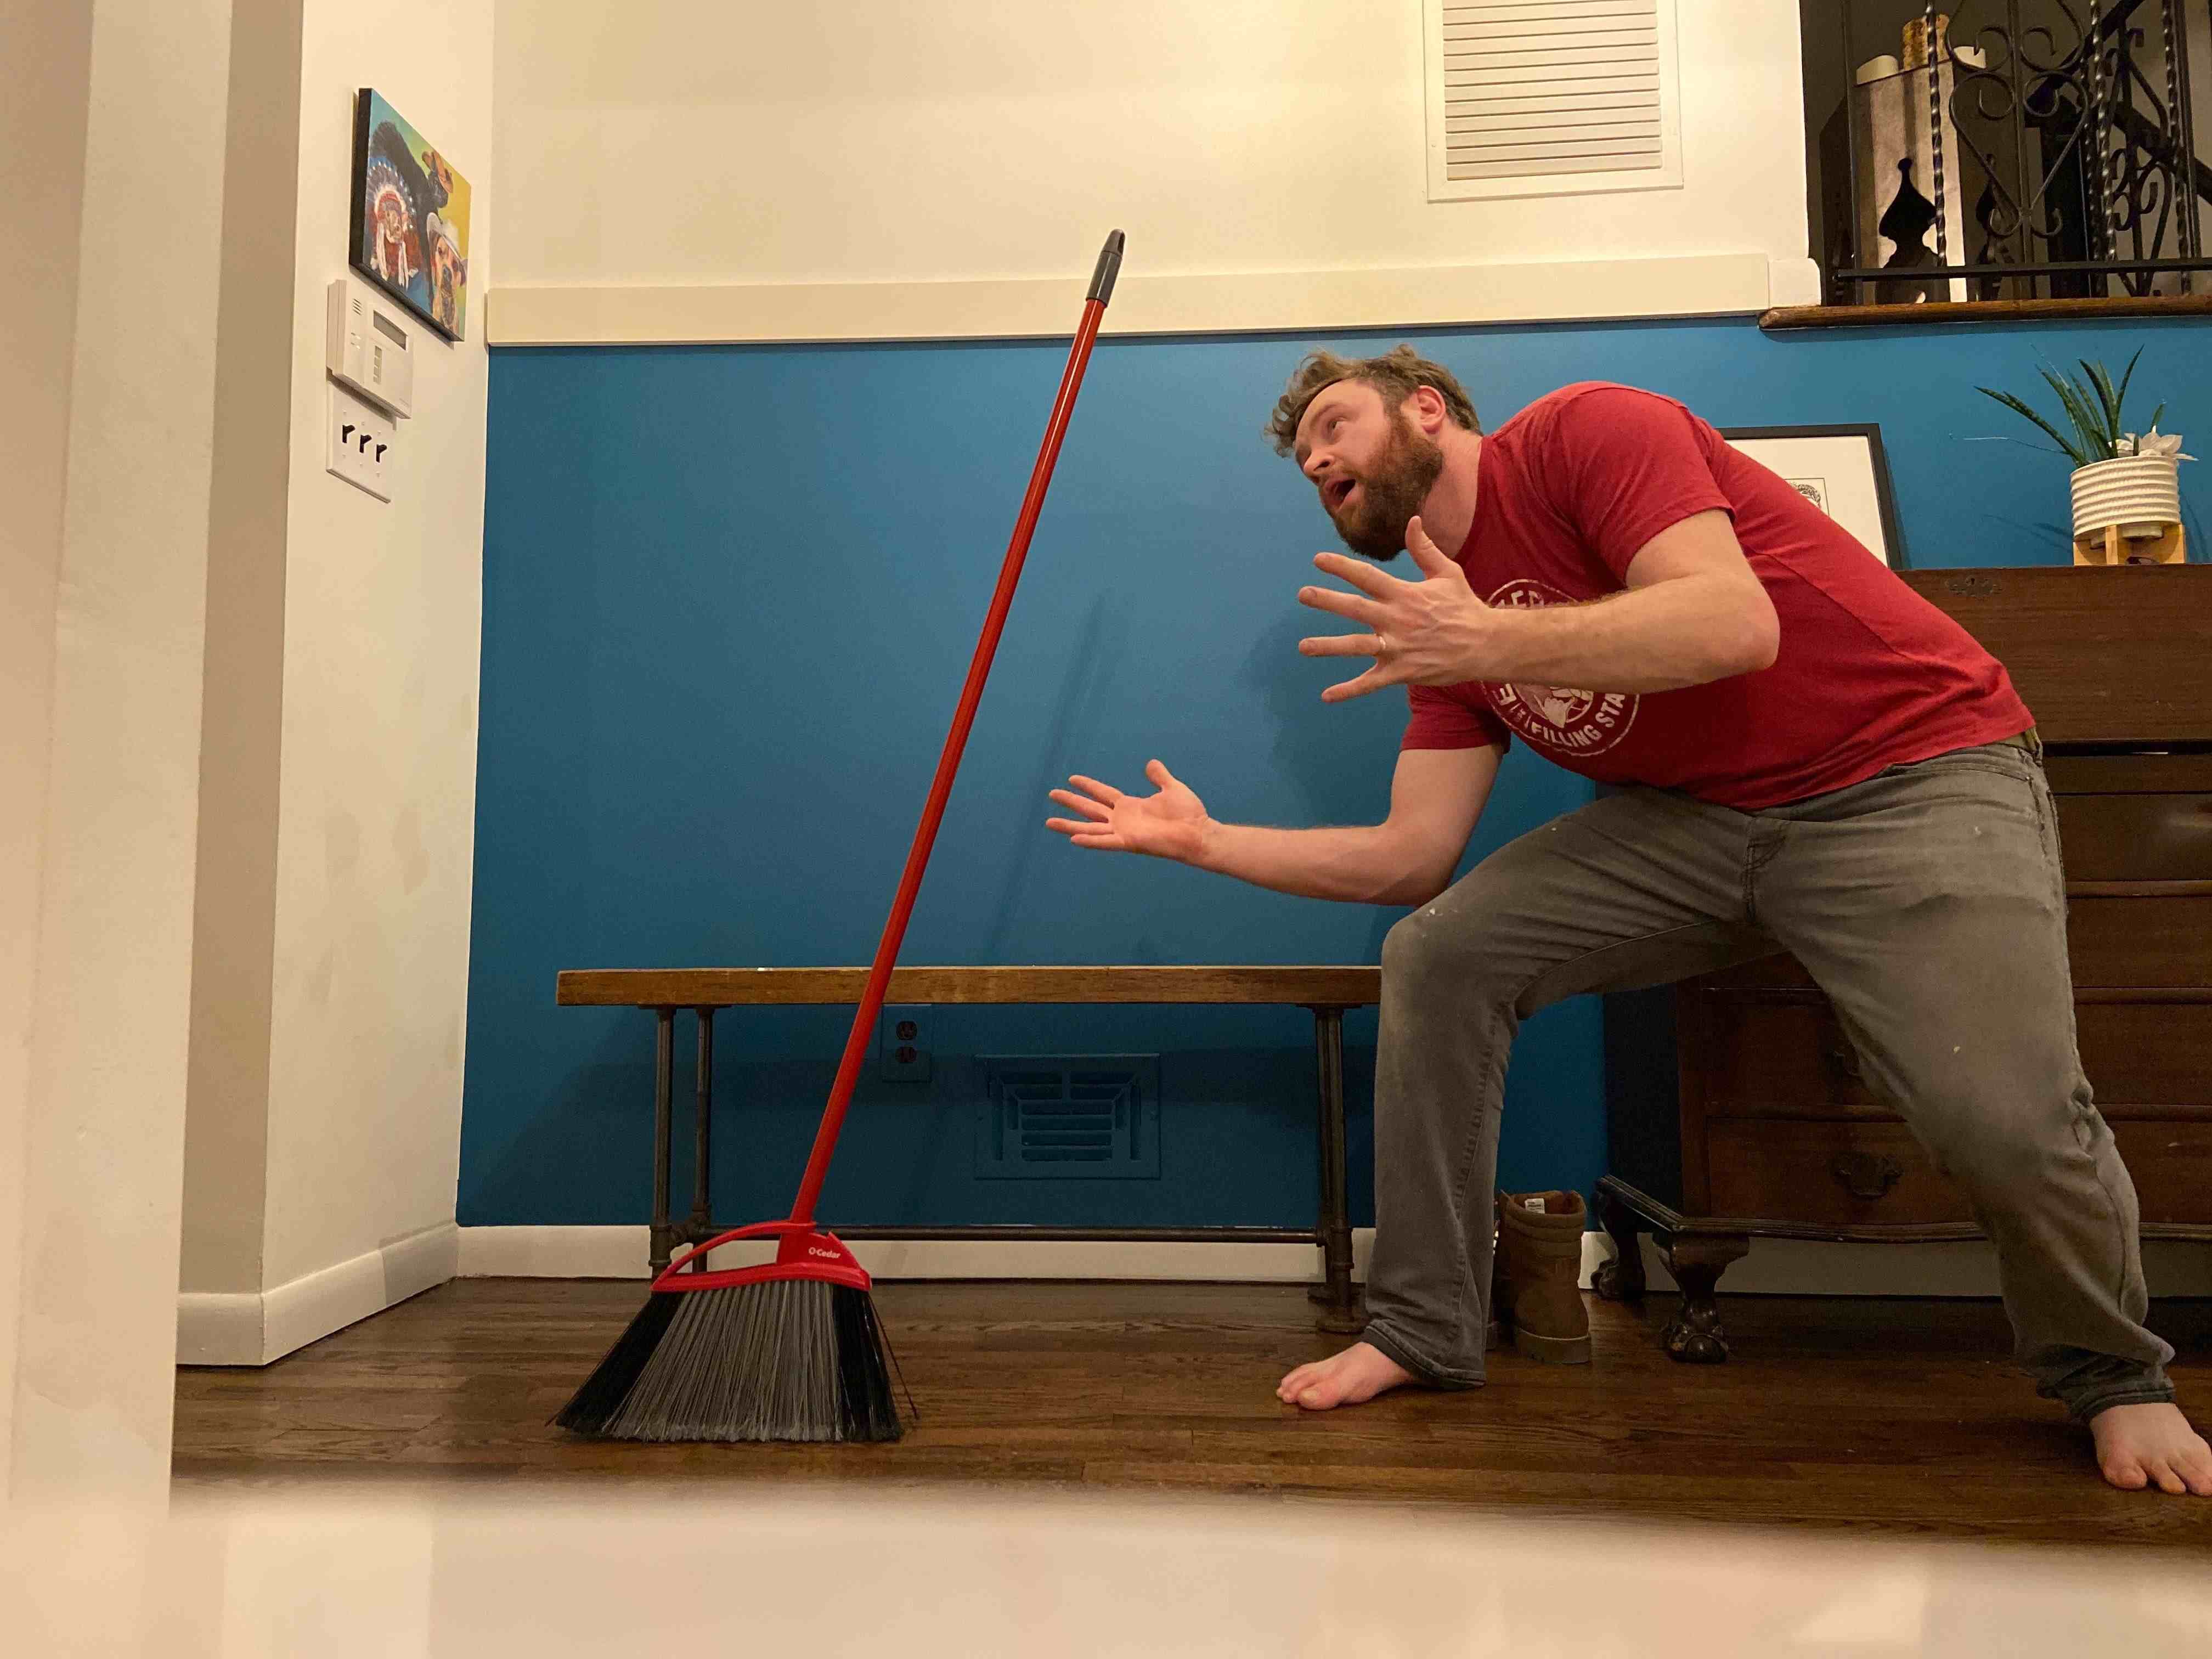 How To Make A Broom Stand Up